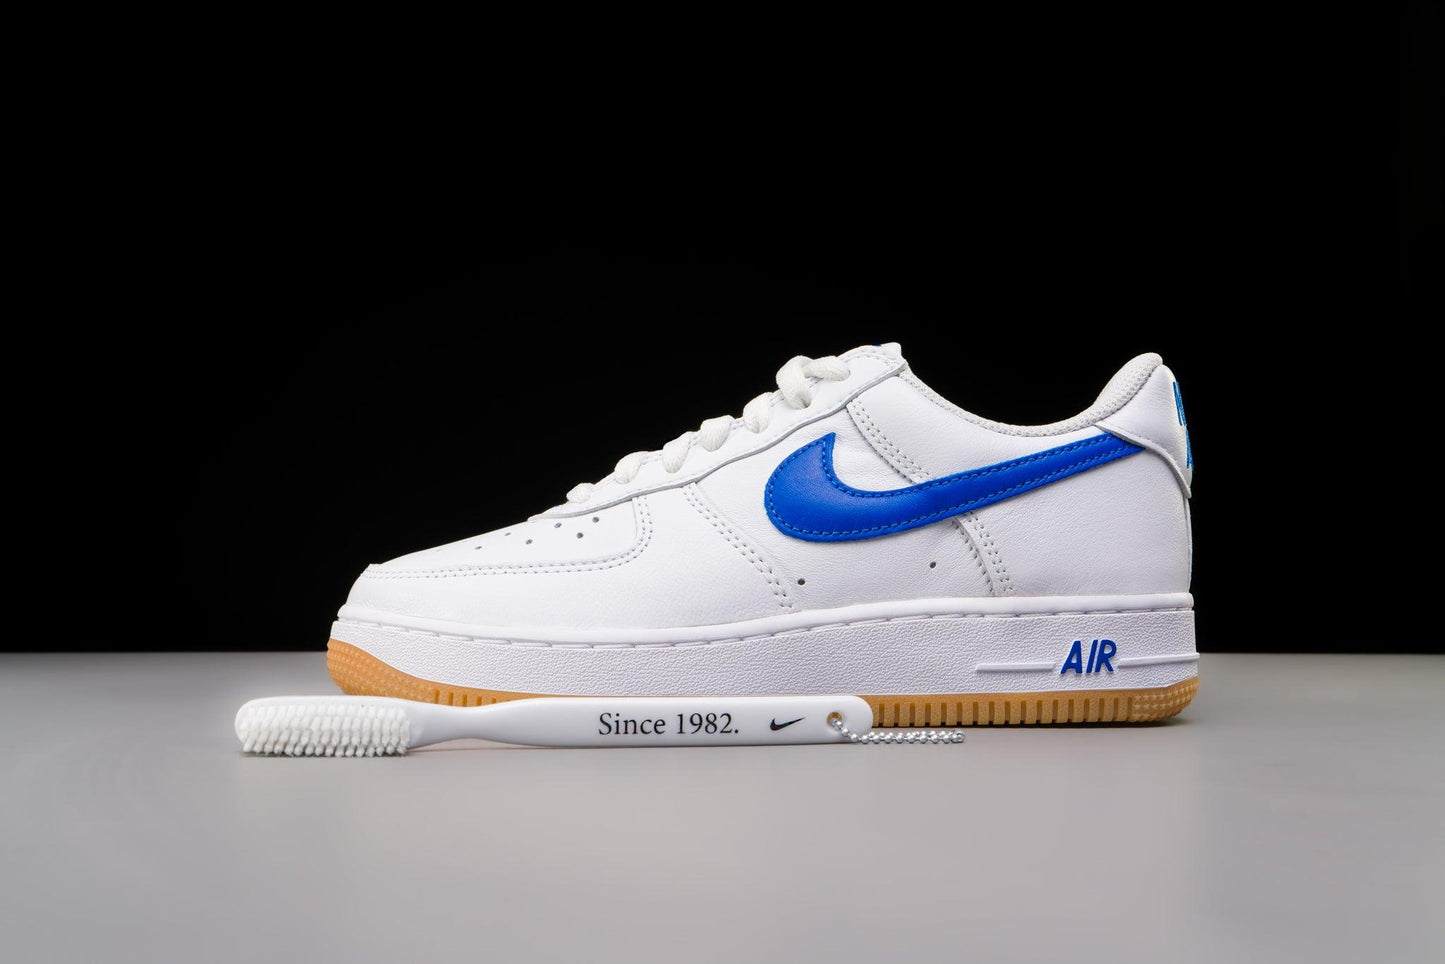 Nike Air Force 1 '07 Low Color of the Month Varsity Royal Gum - Lo10M